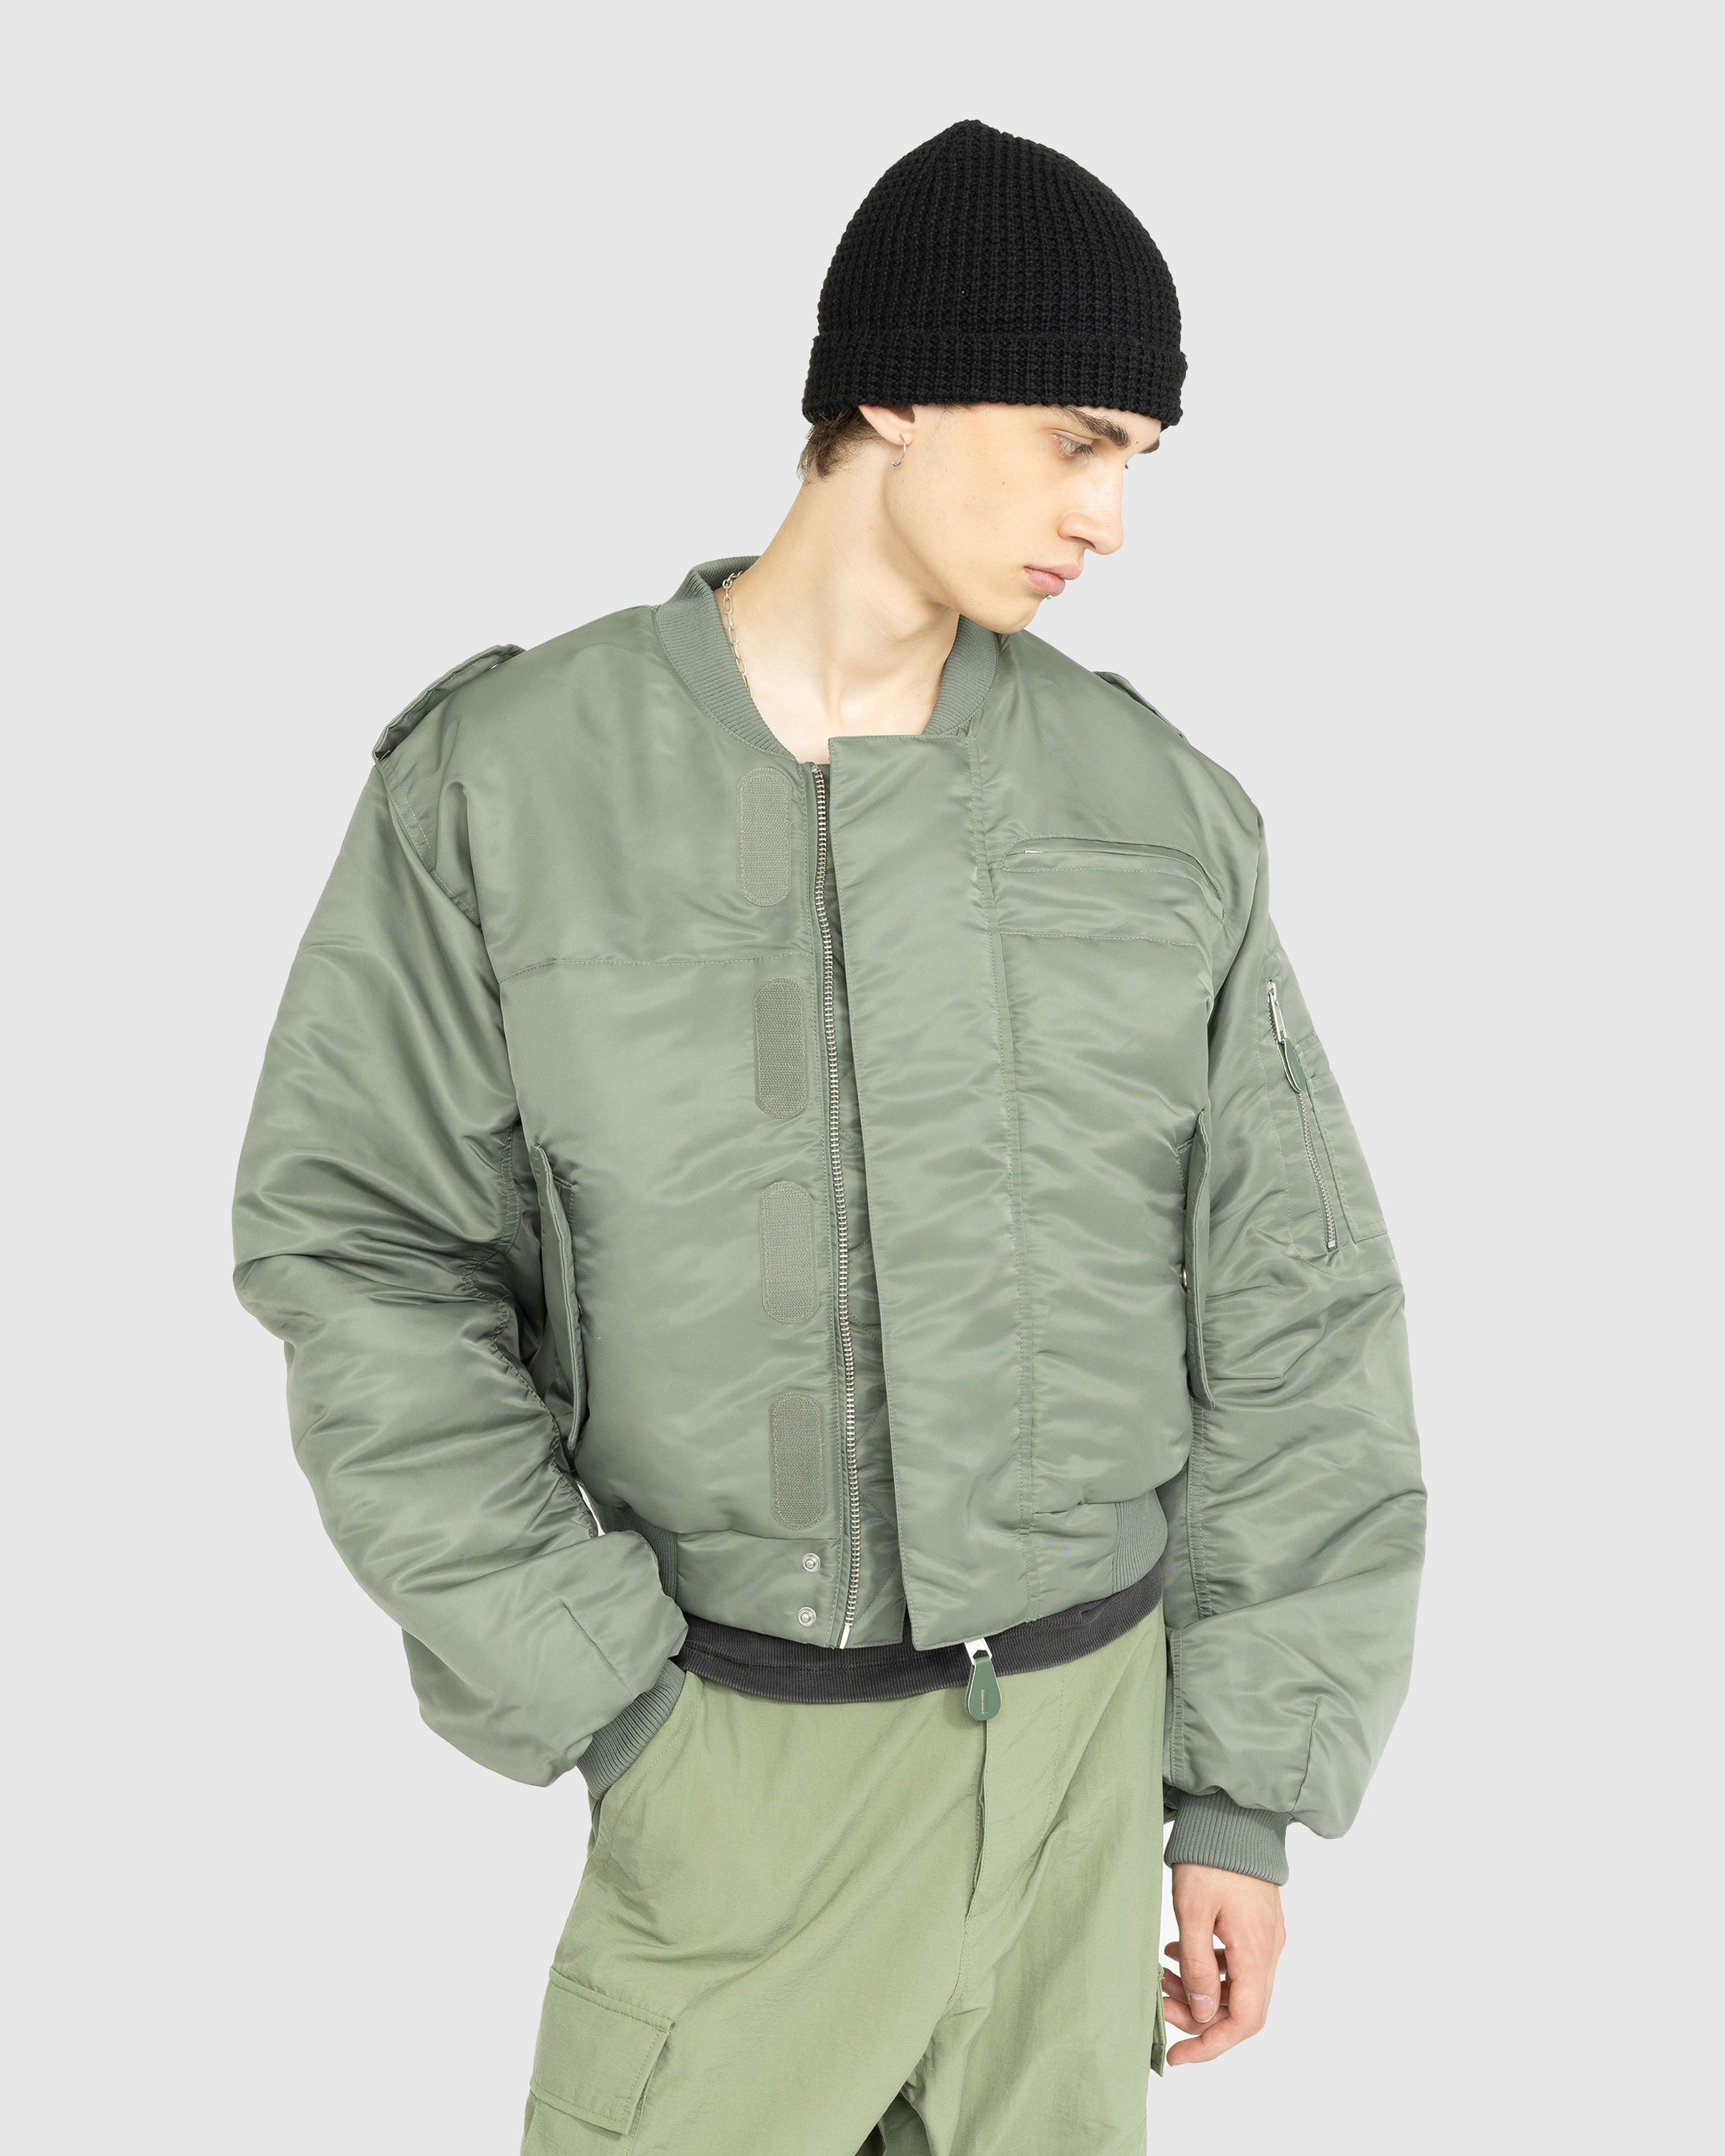 Entire Studios - A-2 Bomber Swamp - Clothing - Grey - Image 2